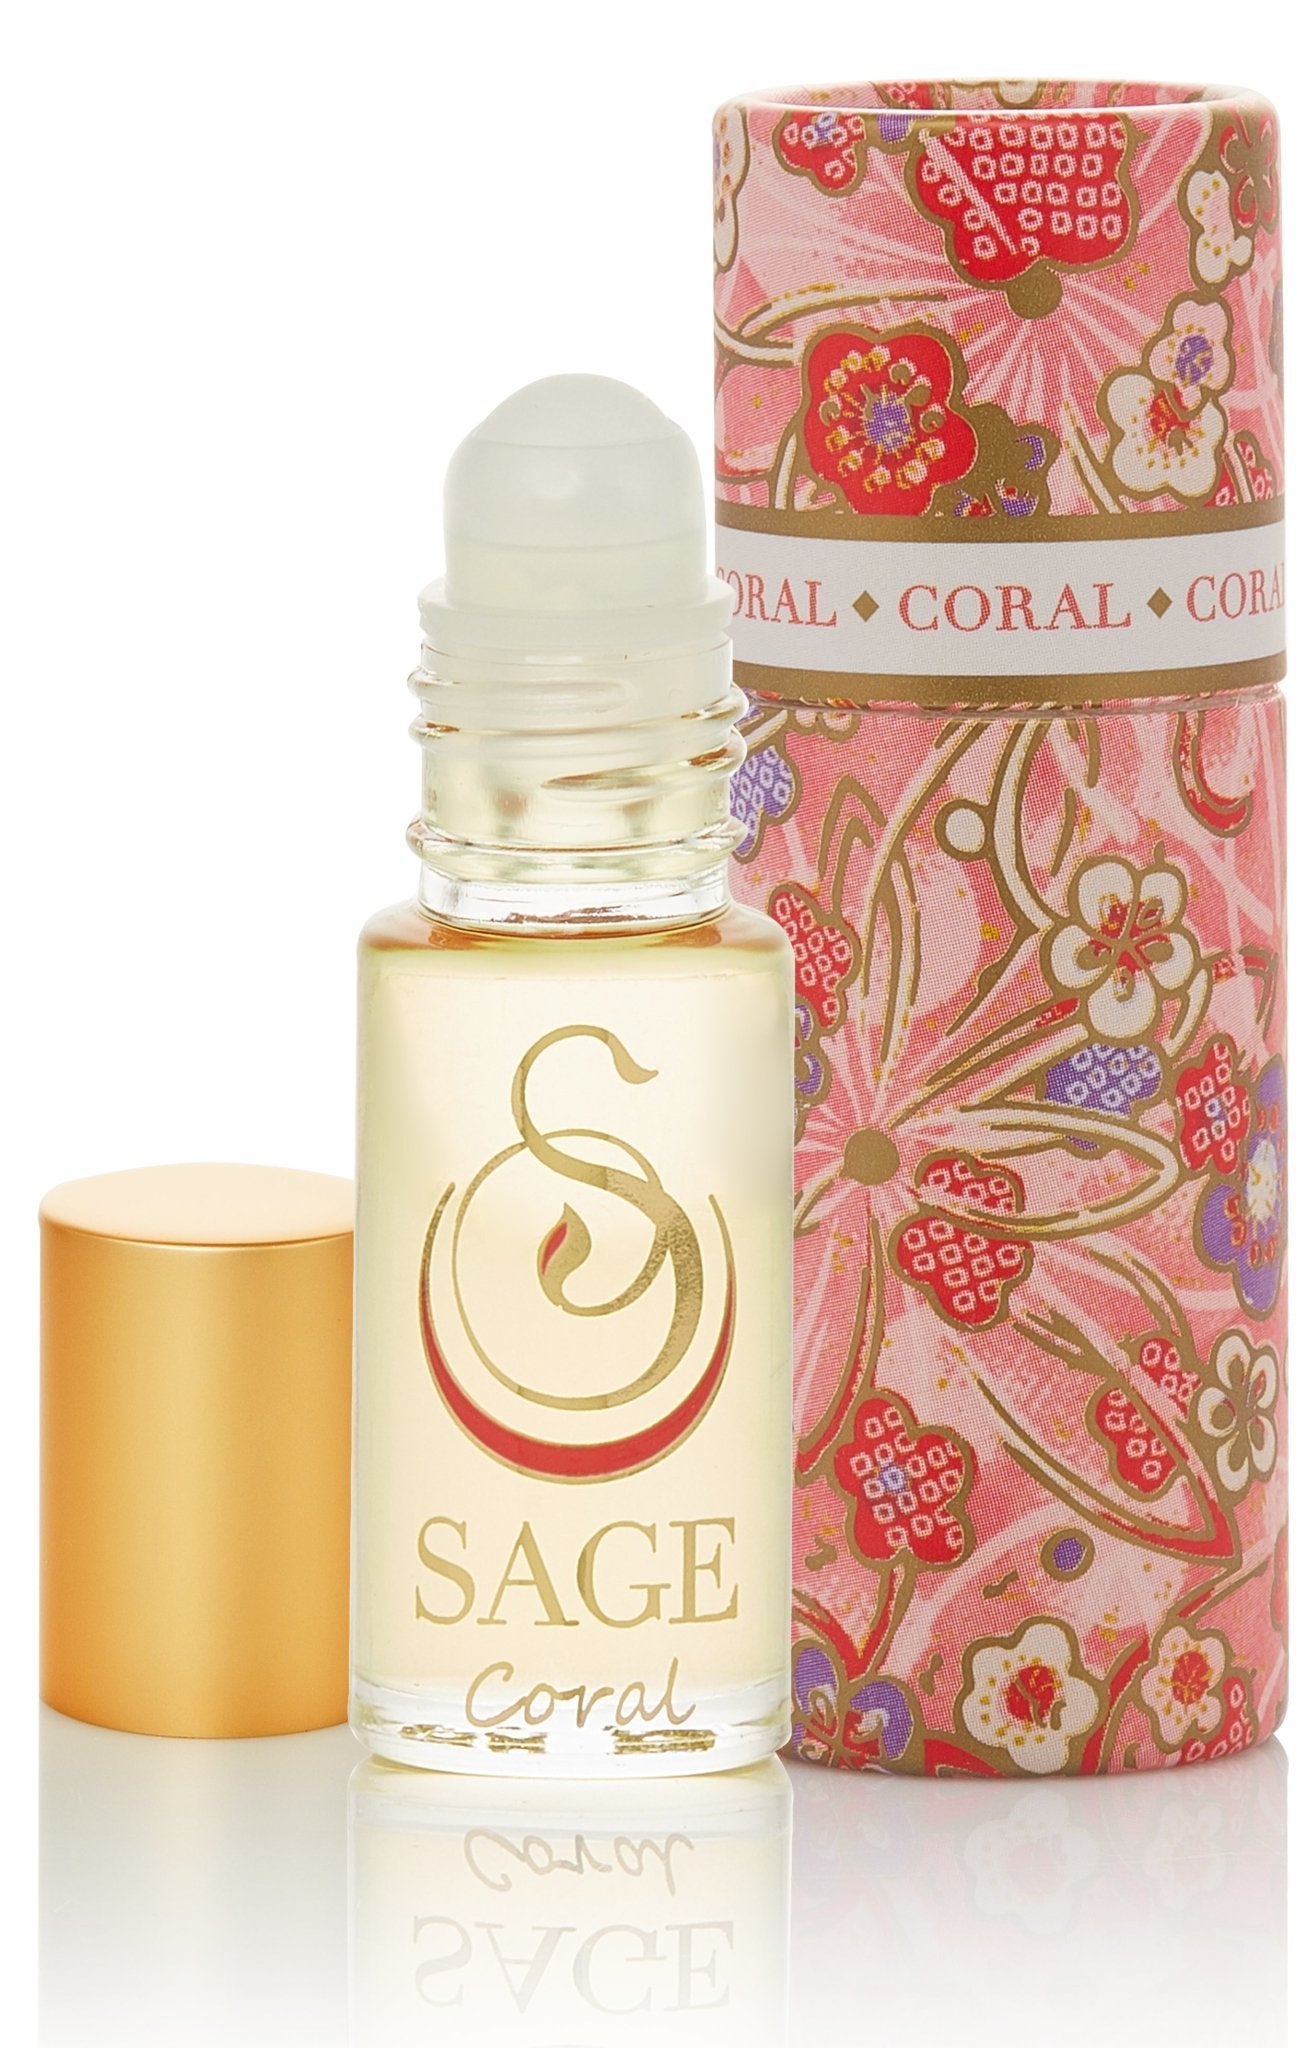 Coral Gemstone Perfume Oil Roll-On by Sage - The Sage Lifestyle